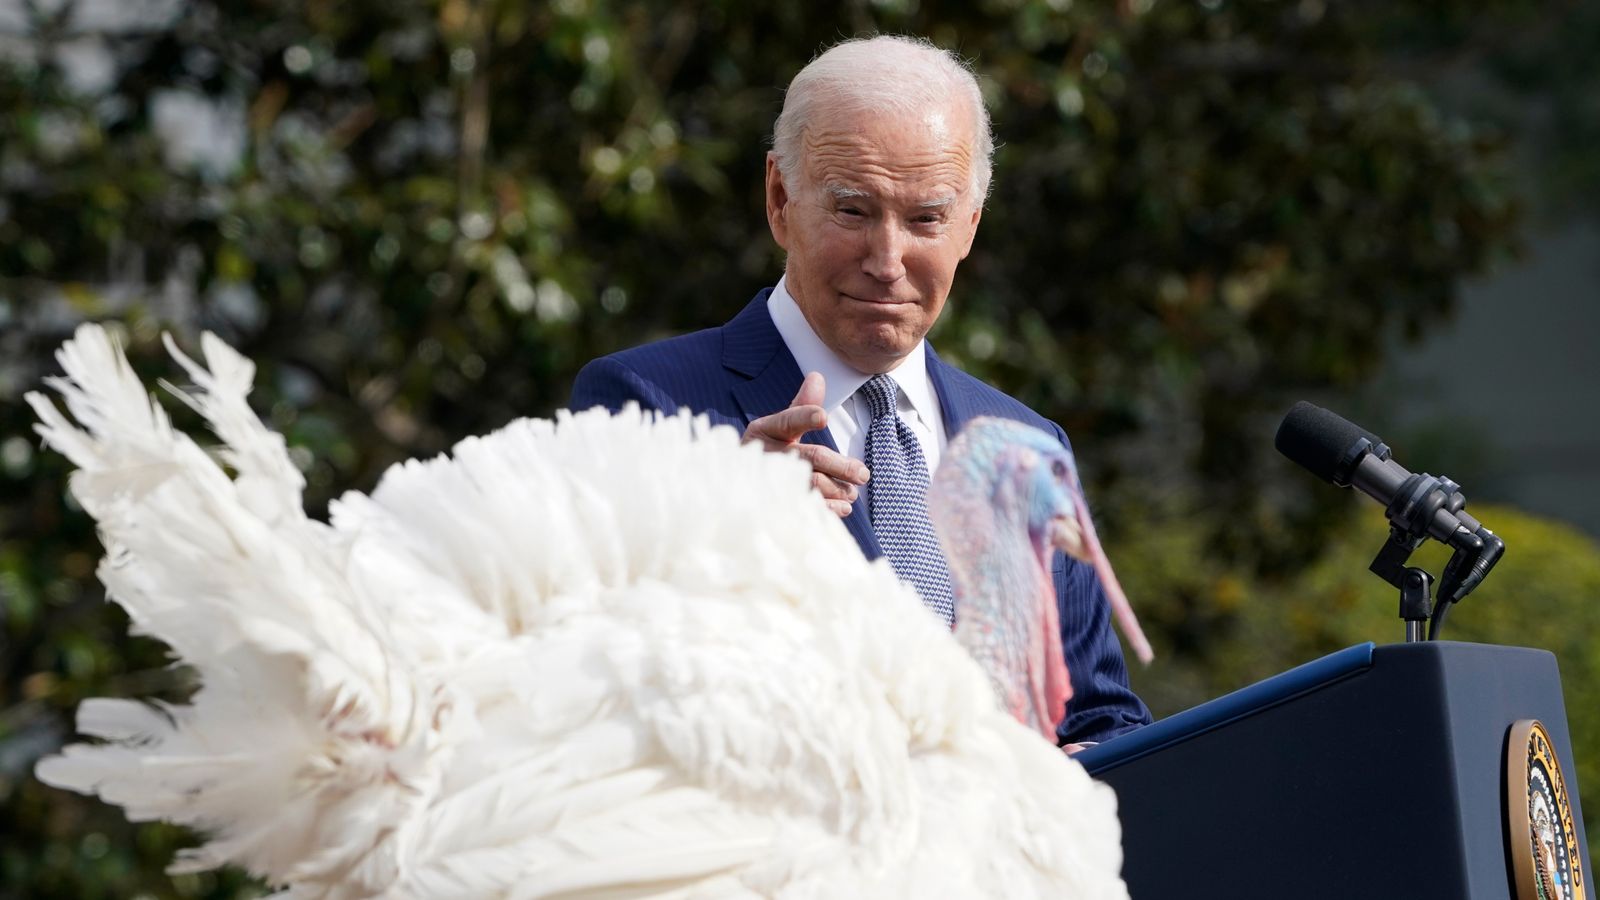 President Joe Biden confuses Taylor Swift with Britney Spears in remarks on his 81st birthday